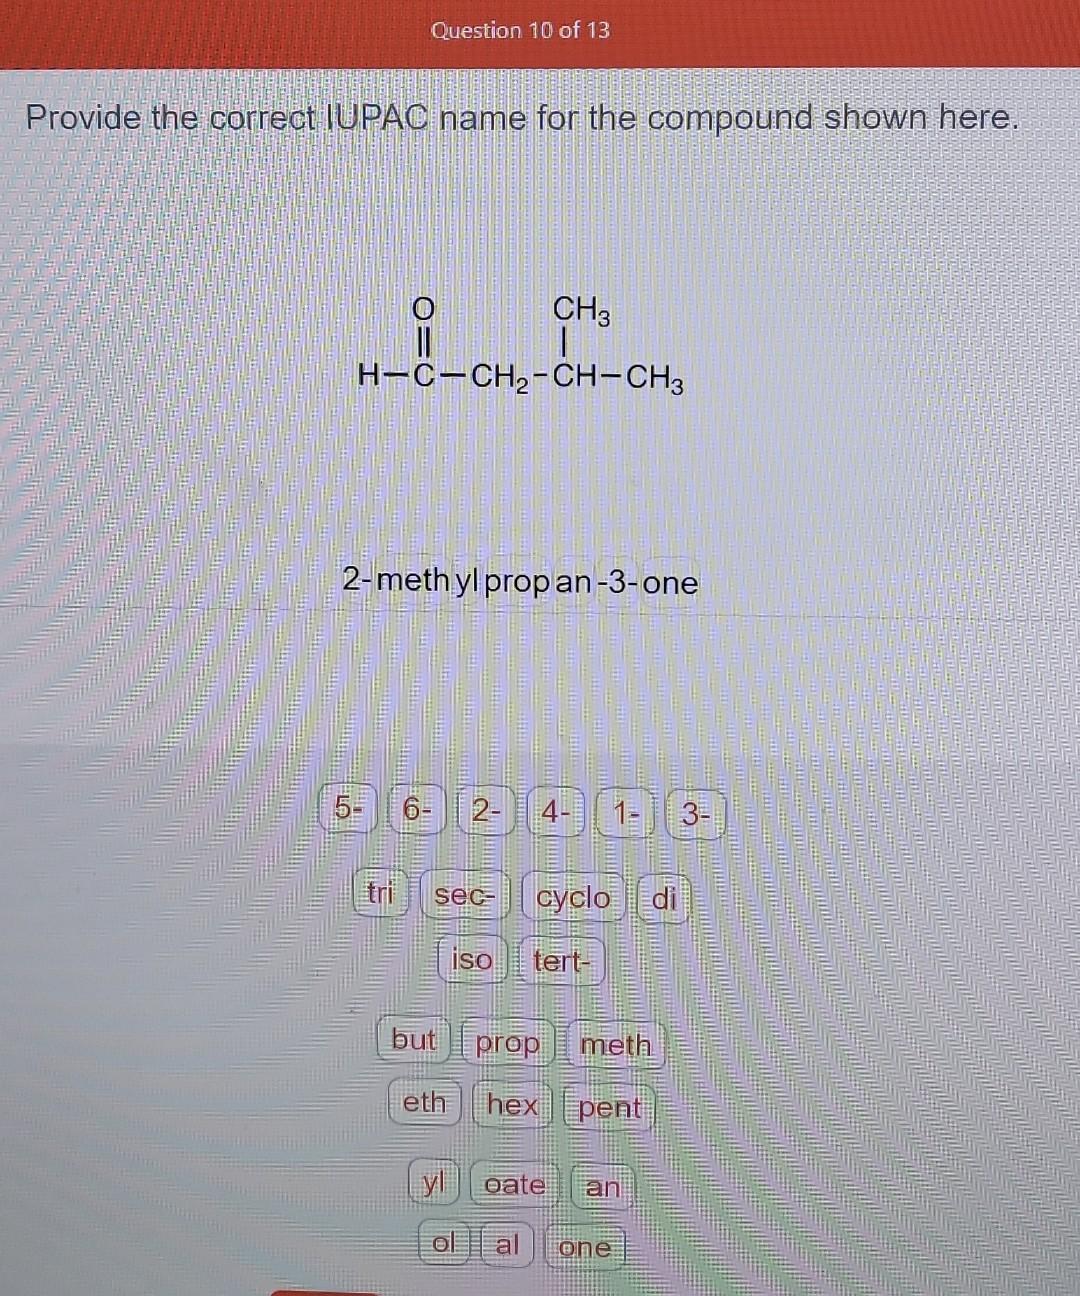 Provide the correct IUPAC name for the compound shown here.
2-meth yl prop an-3-one